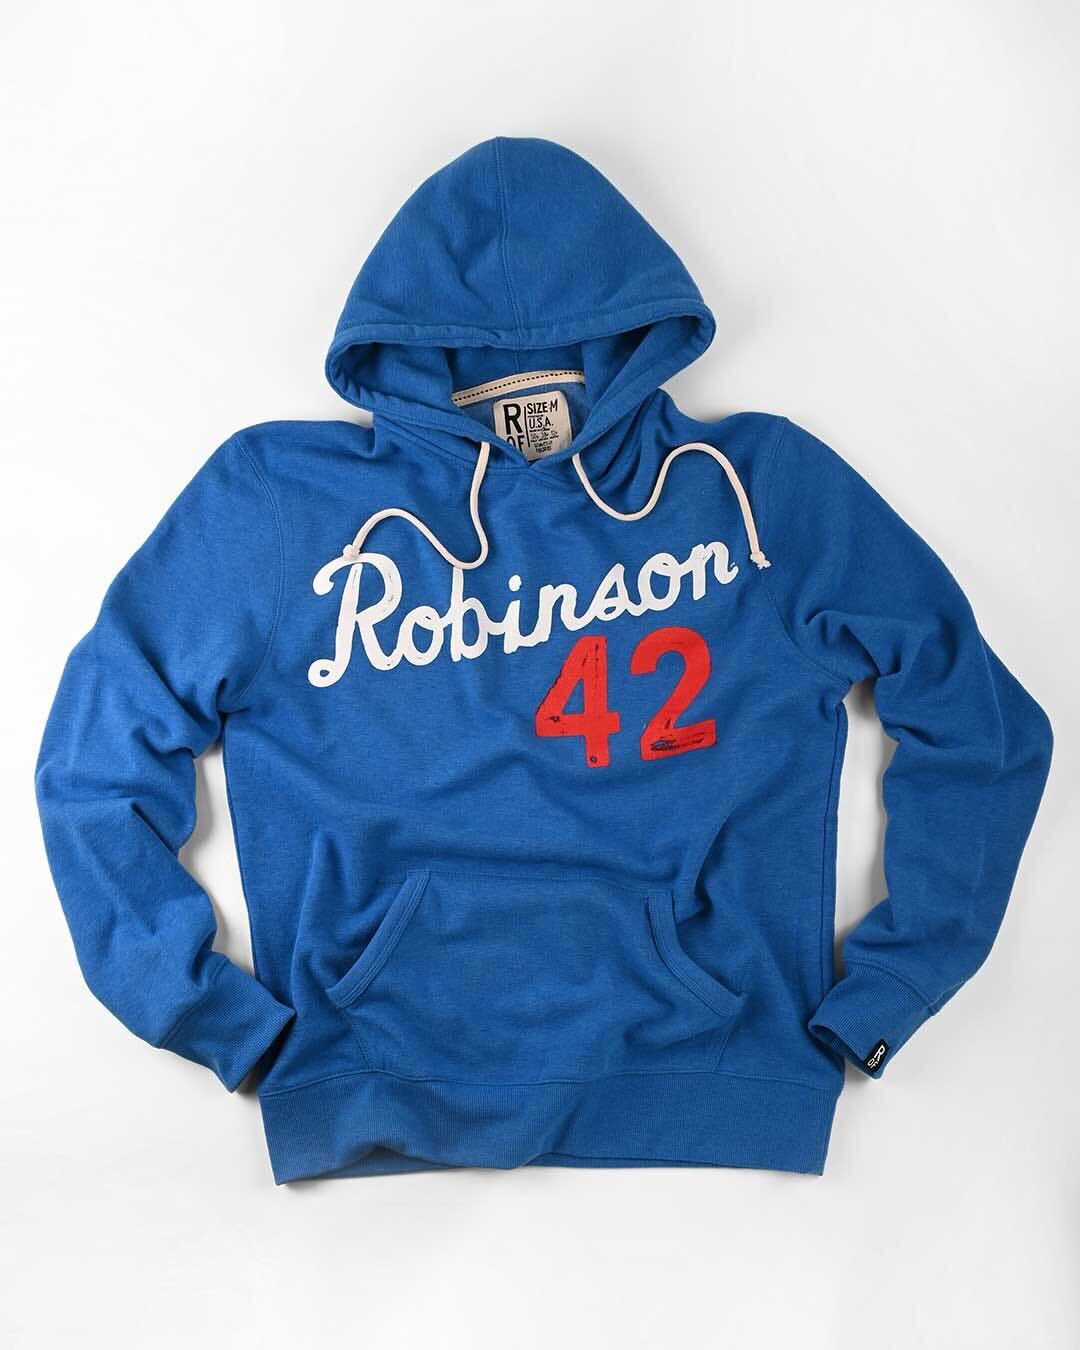 Jackie Robinson #42 Essential Blue Hoody - Roots of Fight Canada